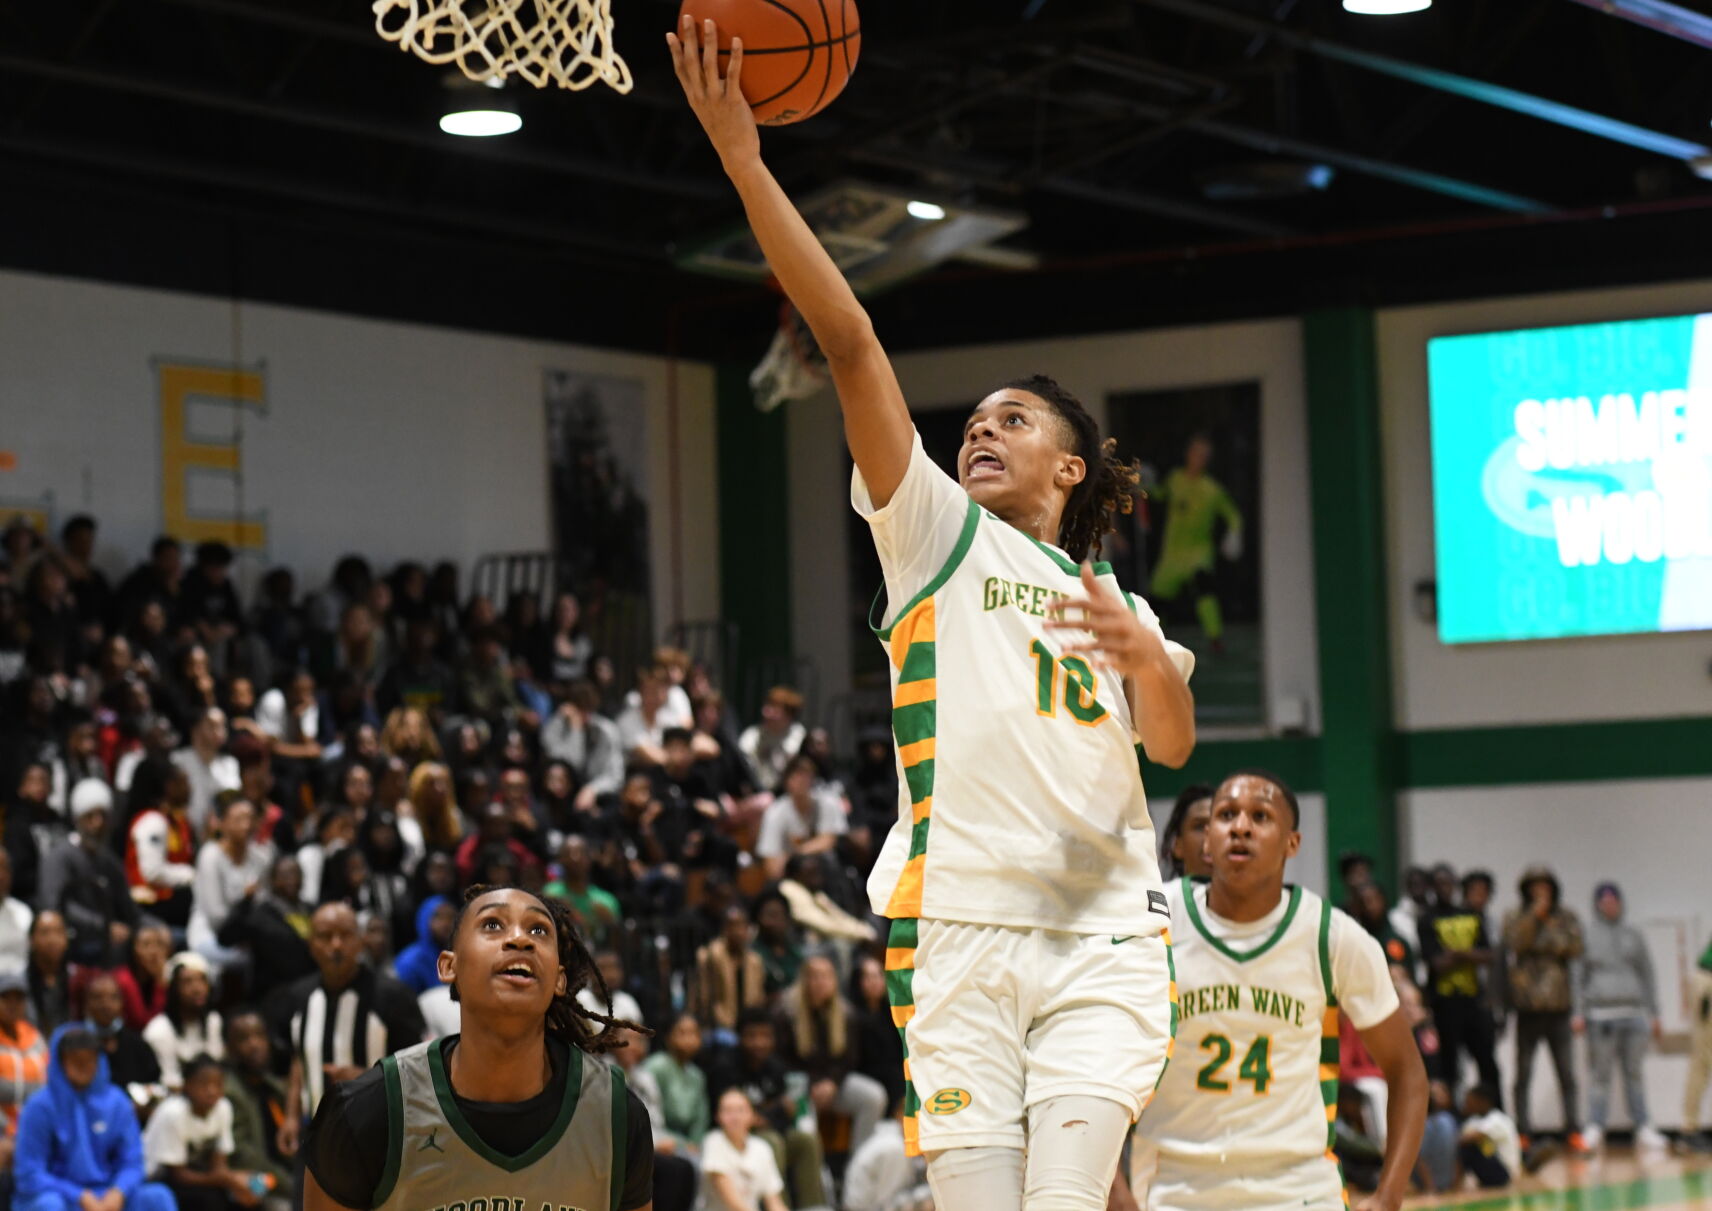 Summerville boys prevail over ranked squads